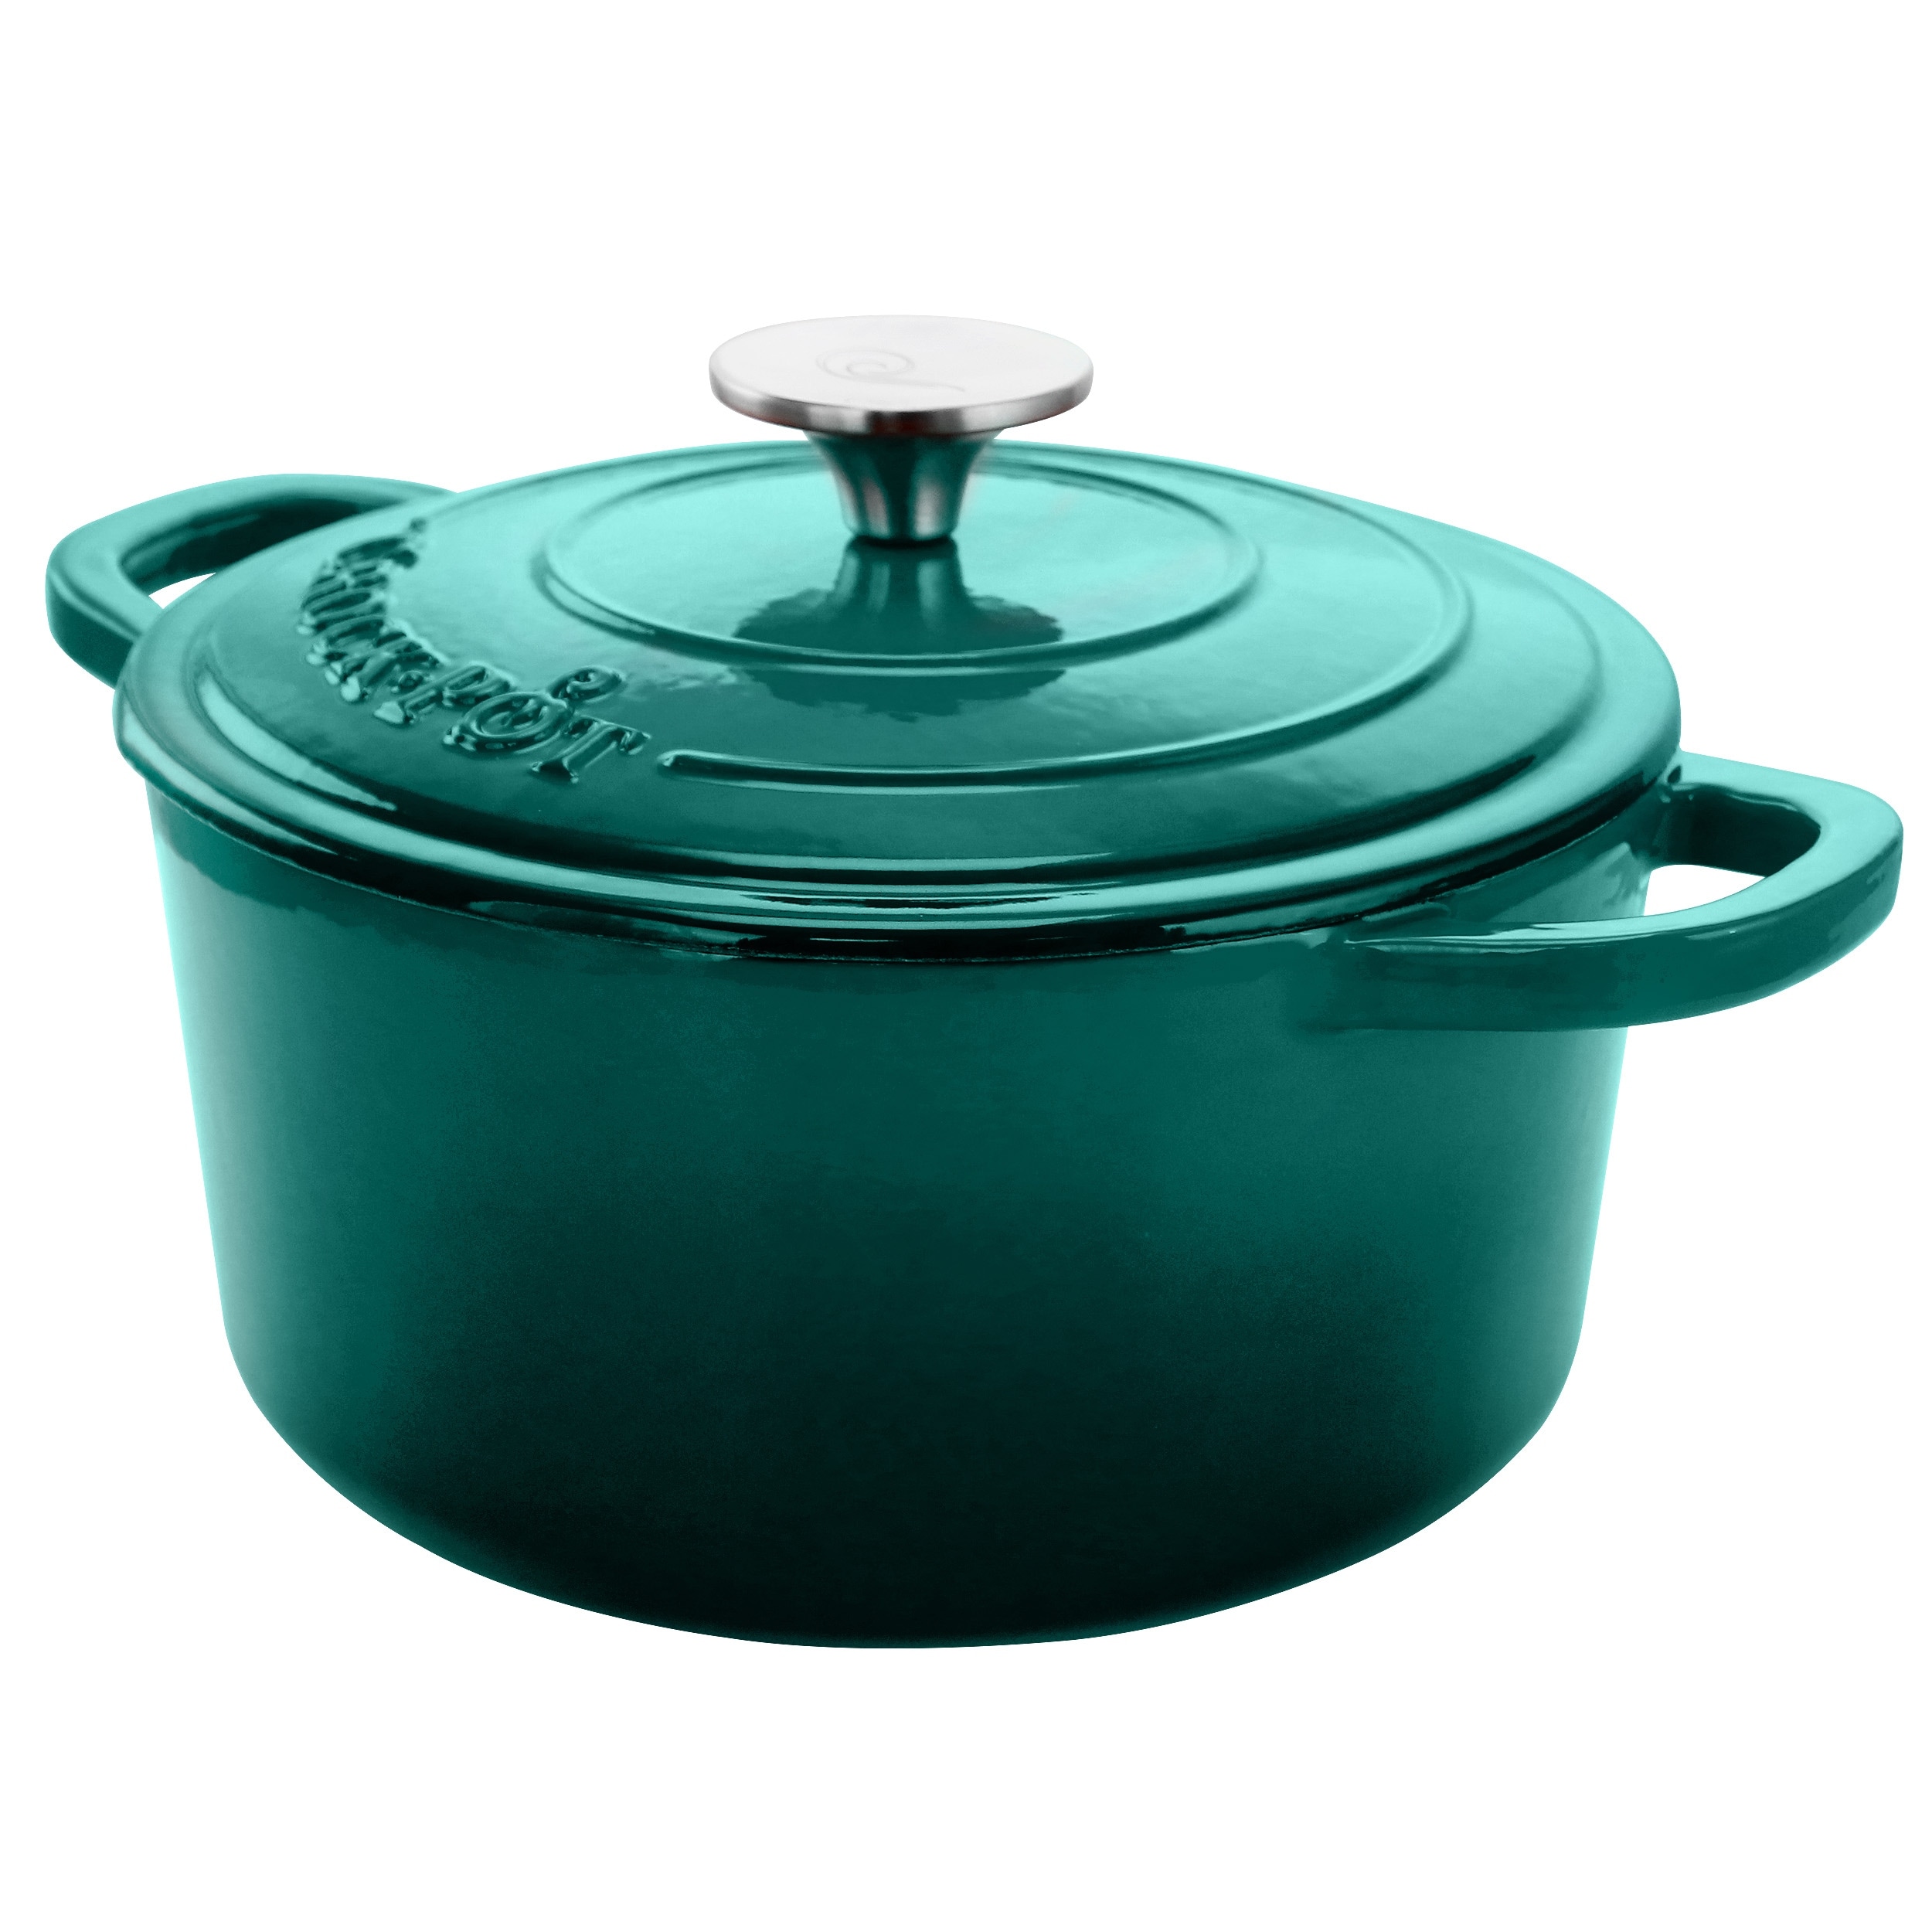 https://ak1.ostkcdn.com/images/products/is/images/direct/5c5a853315a901deba321aa3aa699fbe57cad0b2/3-Quart-Enameled-Cast-Iron-Casserole-with-Lid-in-Turquoise.jpg